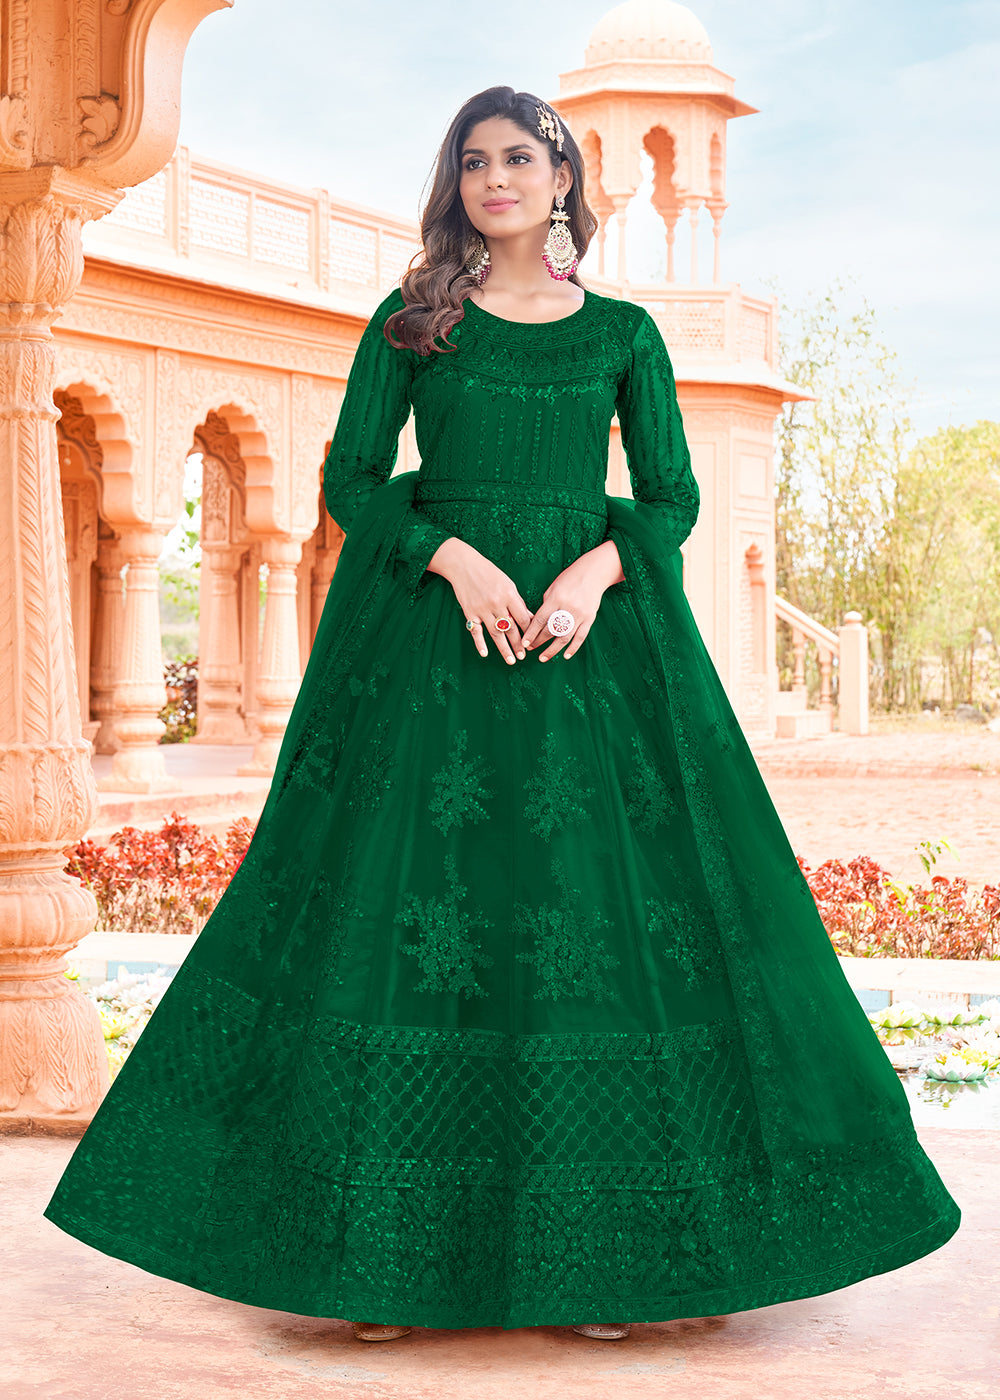 Buy Now Long Length Dark Green Embroidered Net Anarkali Suit Online in USA, UK, Australia, New Zealand, Canada, Italy & Worldwide at Empress Clothing.